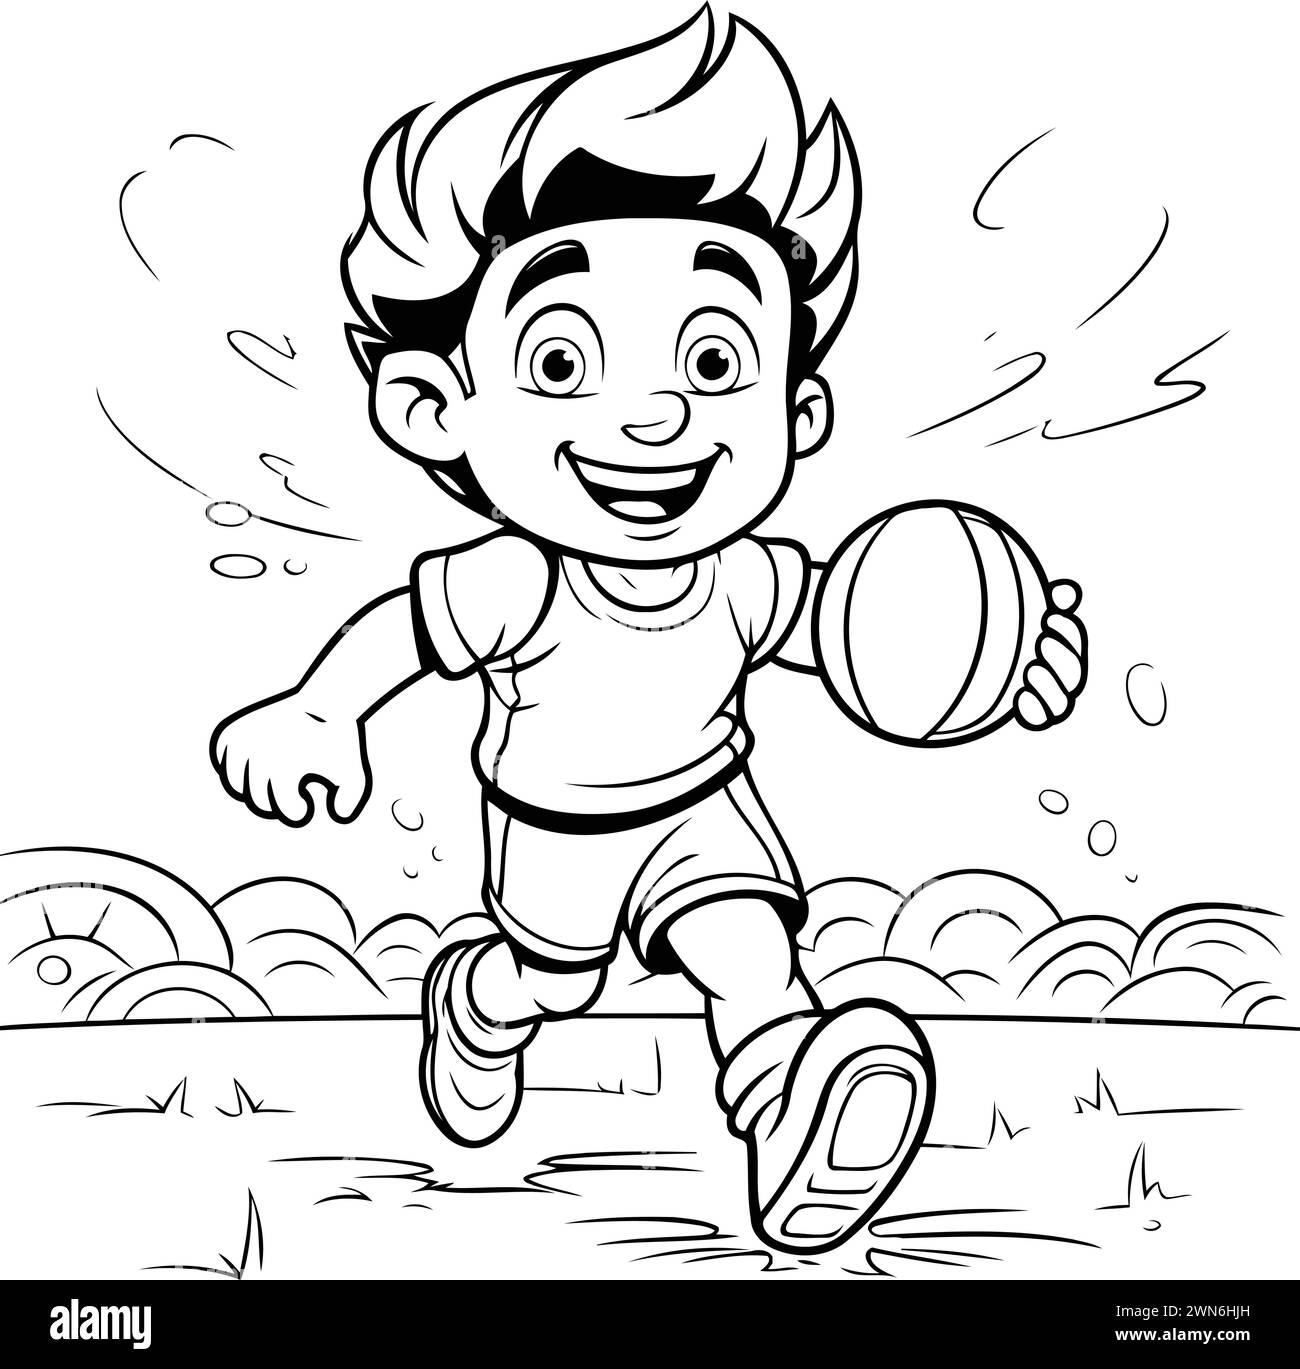 Black and White Cartoon Illustration of a Kid Playing Rugby or American ...